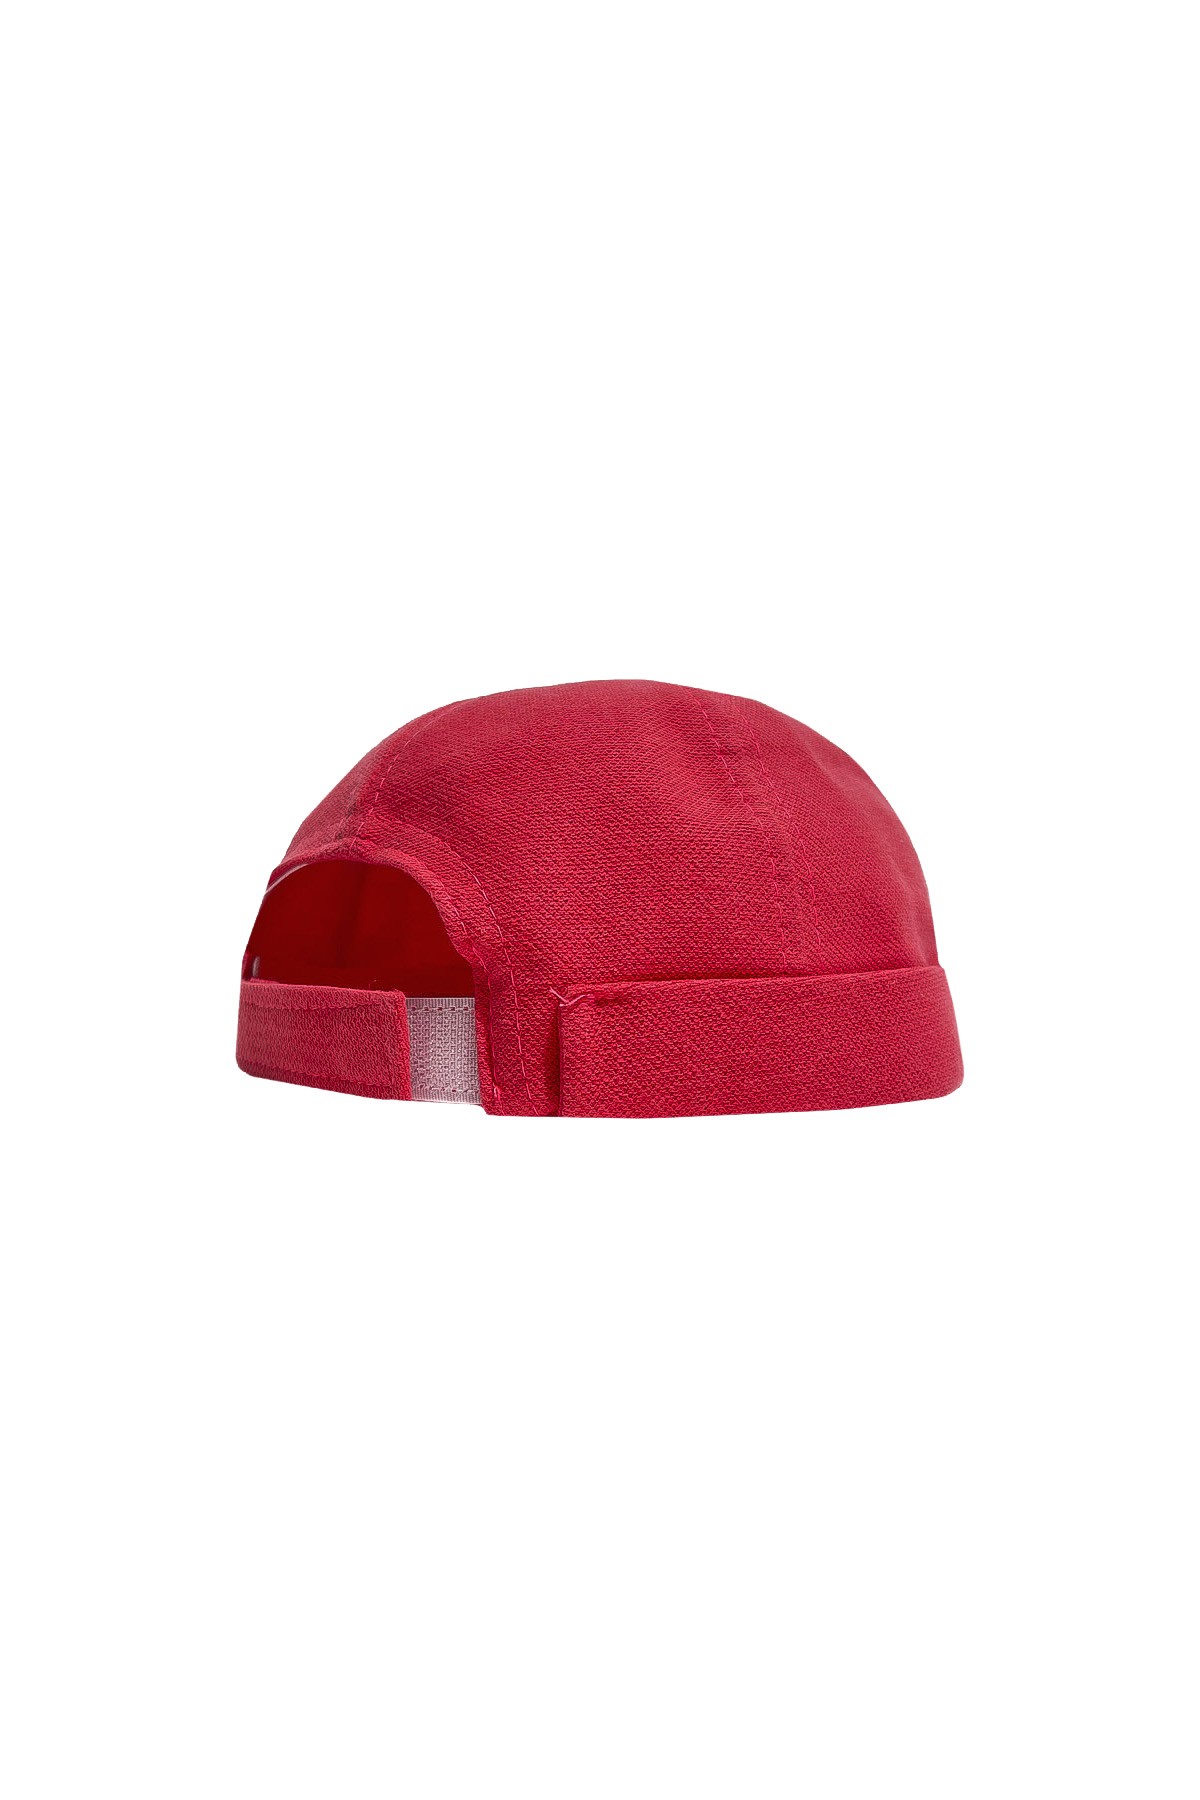 Nuo - Brimless Cap - PINK